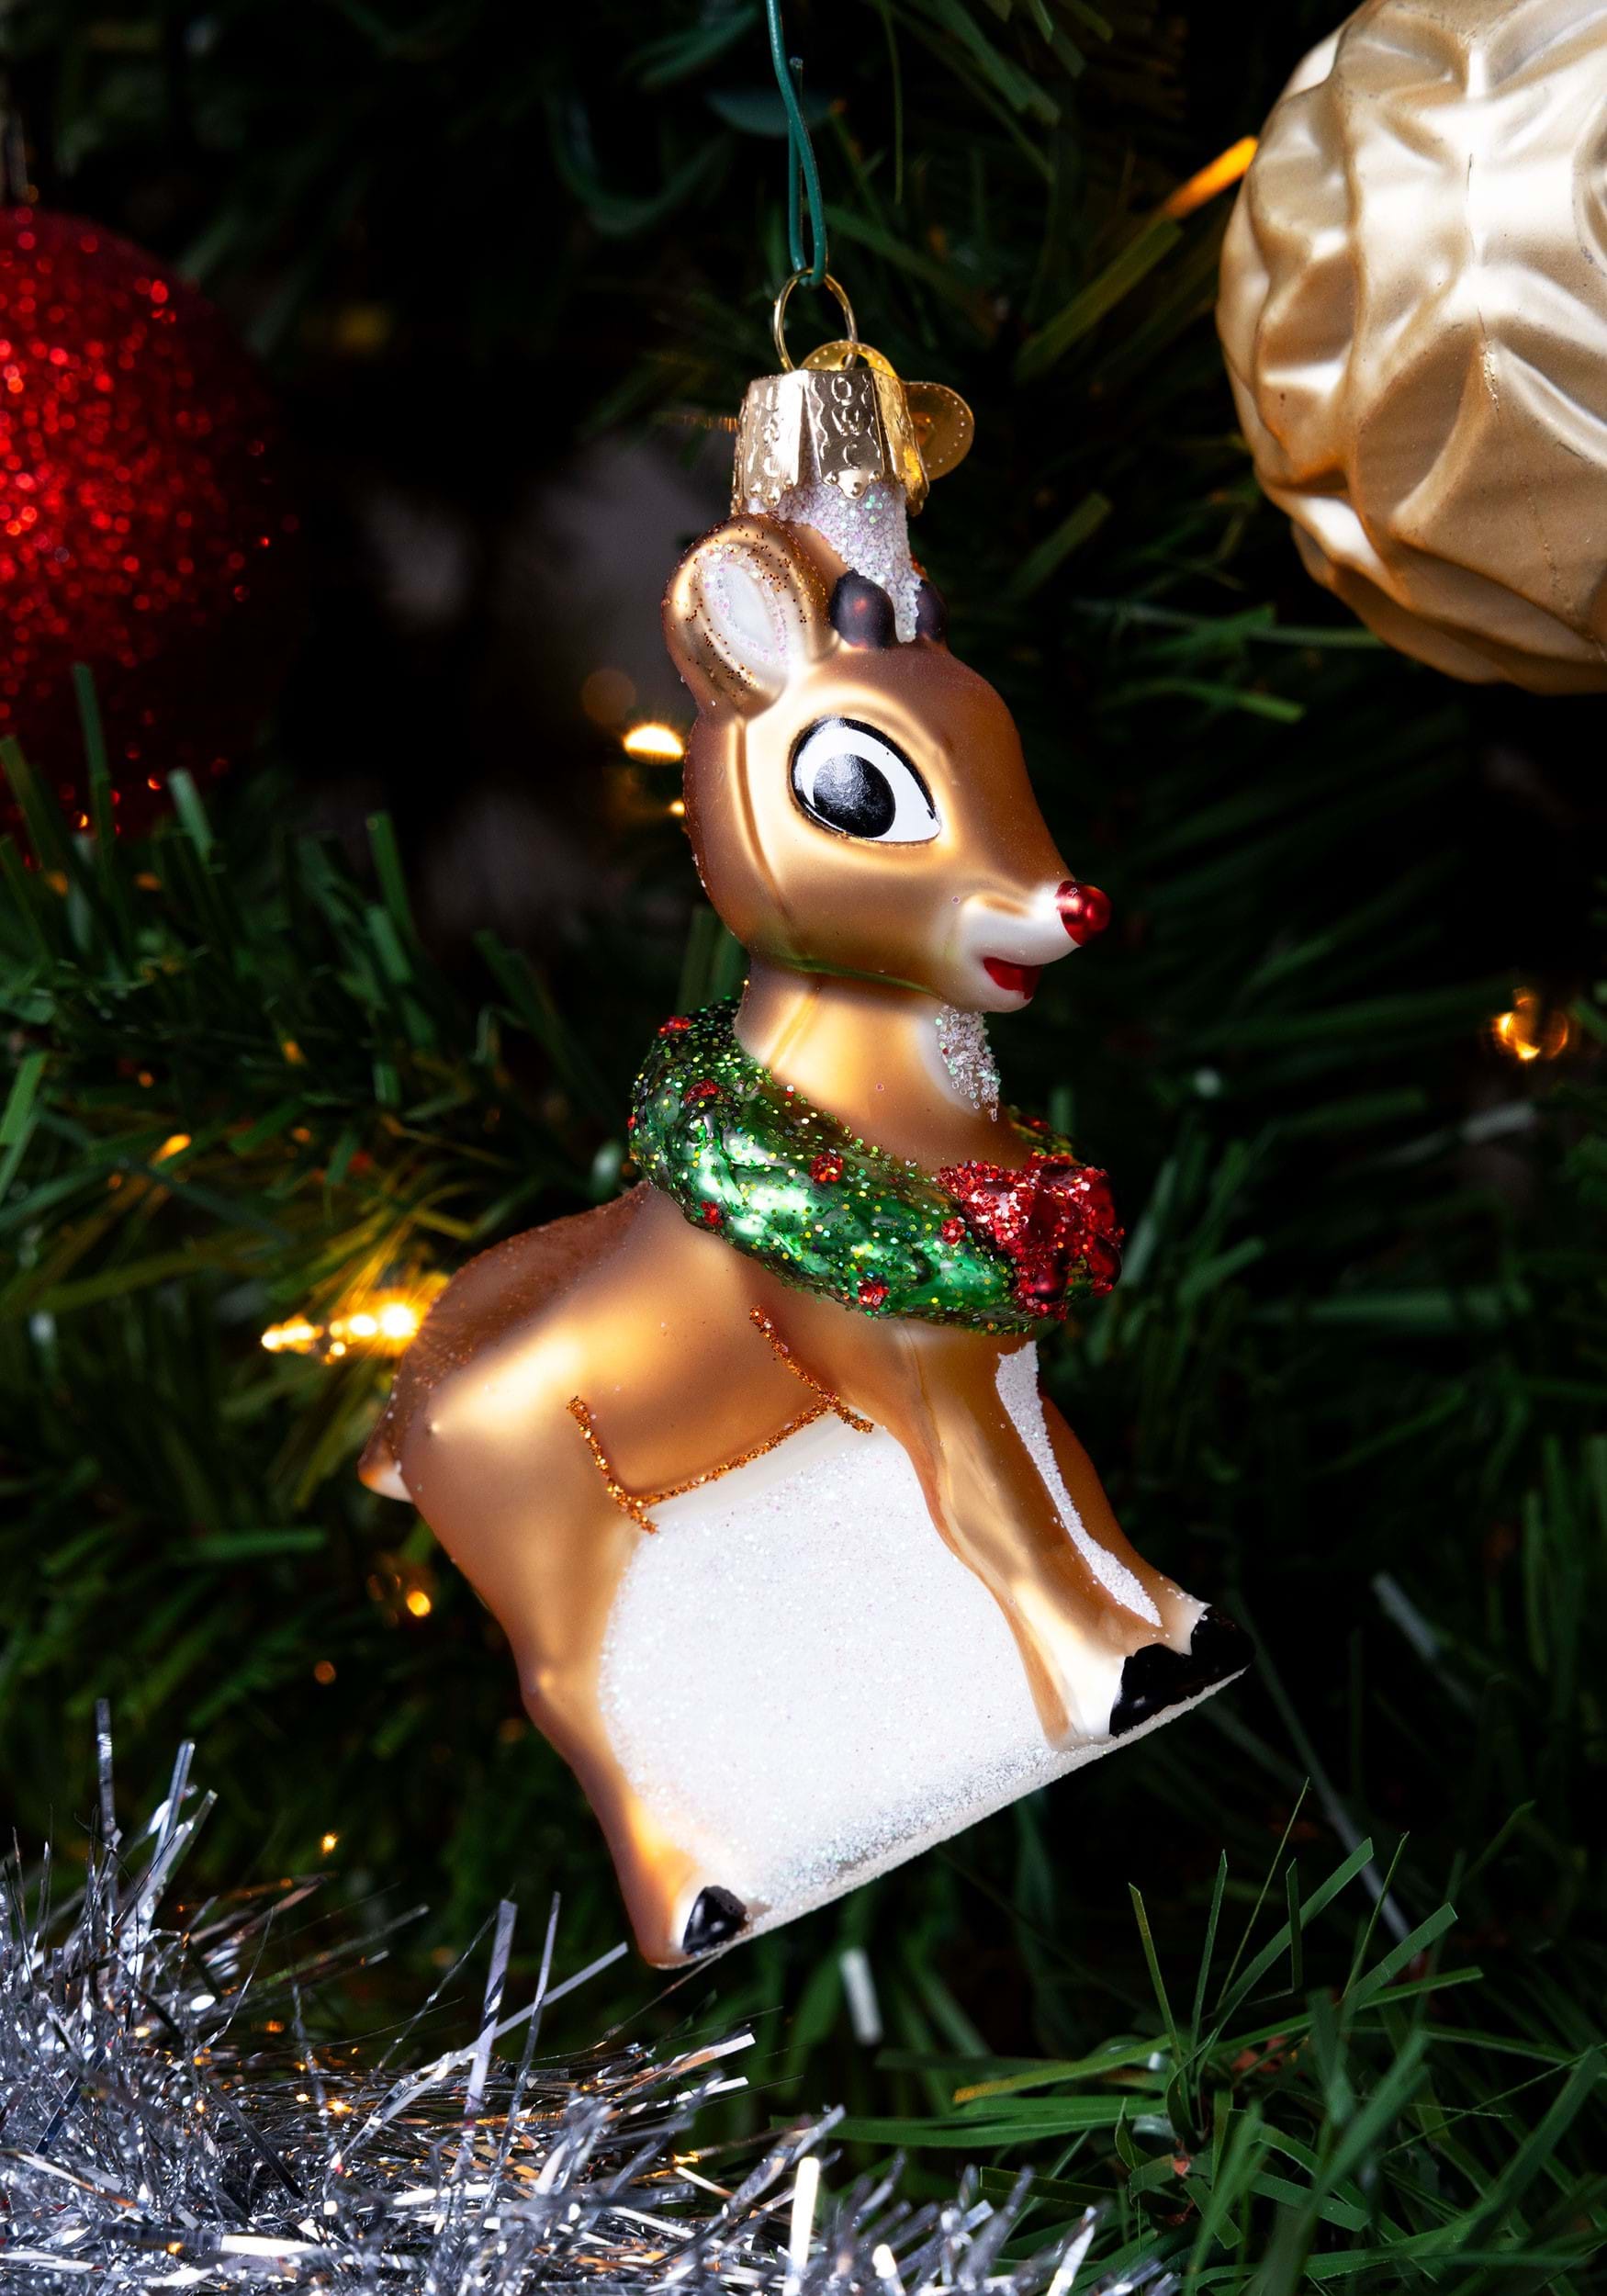 Rudolph The Red-Nosed Reindeer Holiday Ornament